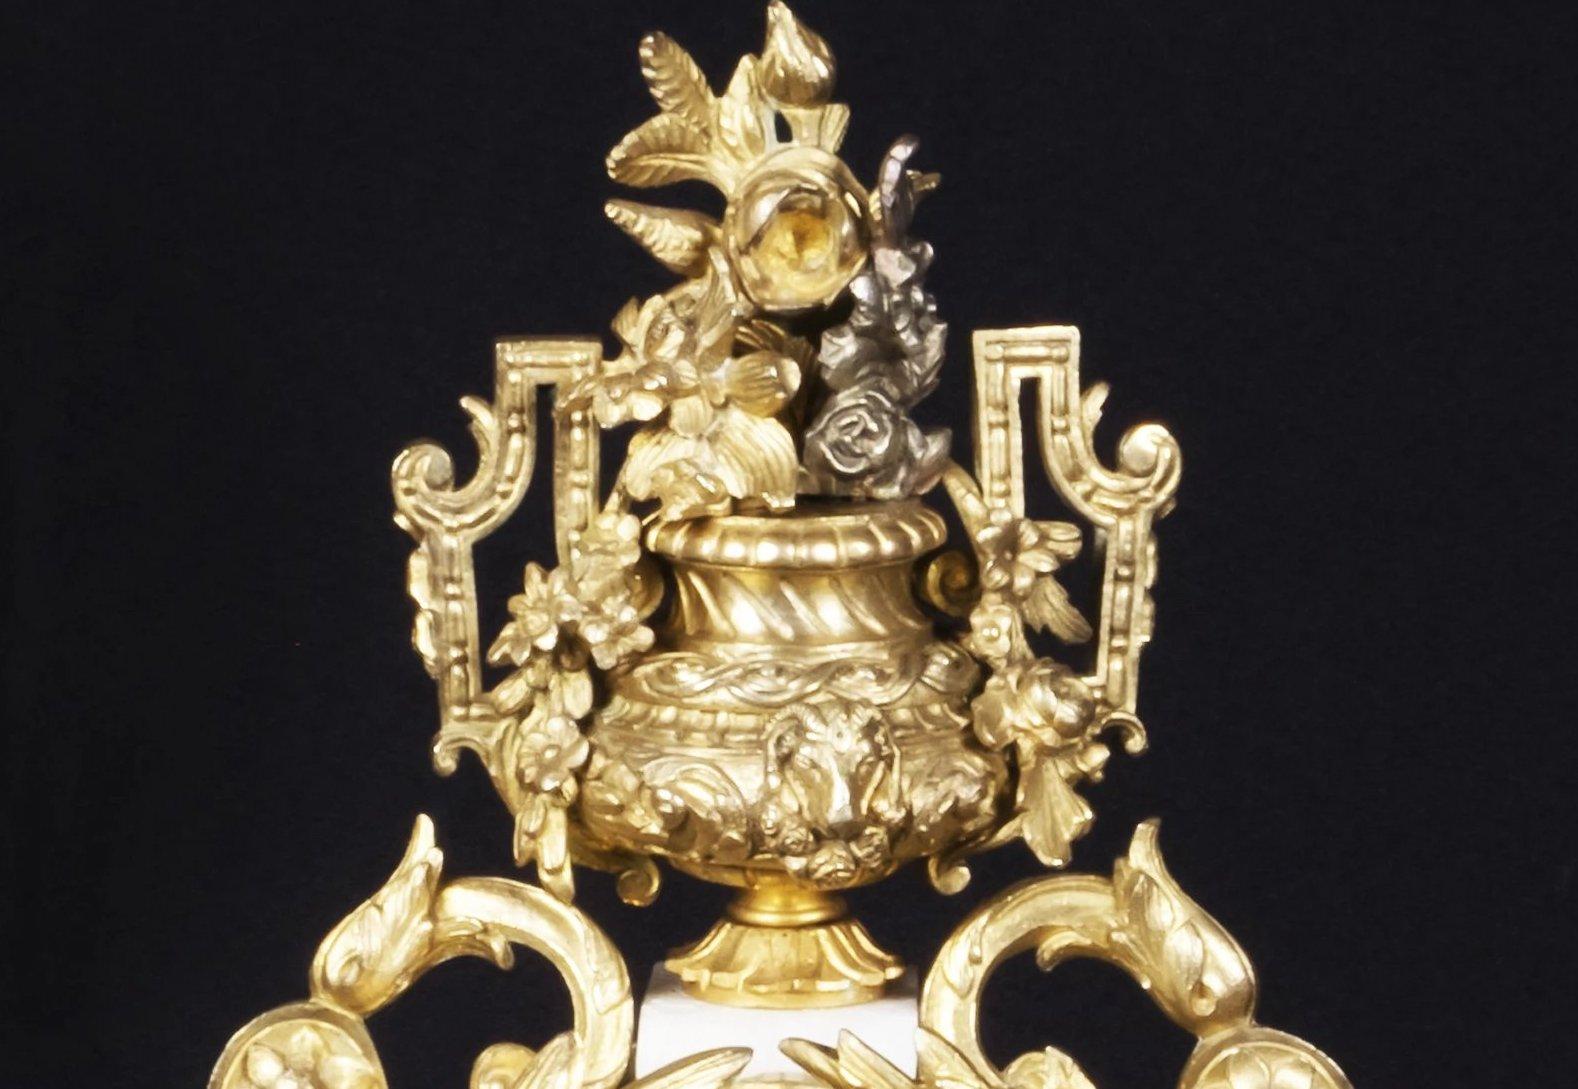 A French ormolu mantel clock
French, mid-late 19th century
Measres: Height 37 cm, width 39 cm, depth 13.5 cm.
A late 19th century French gilt-bronze (ormolu) and marble mantel clock in Louis XVI style.
The round, in a laurel wreath framed porcelain